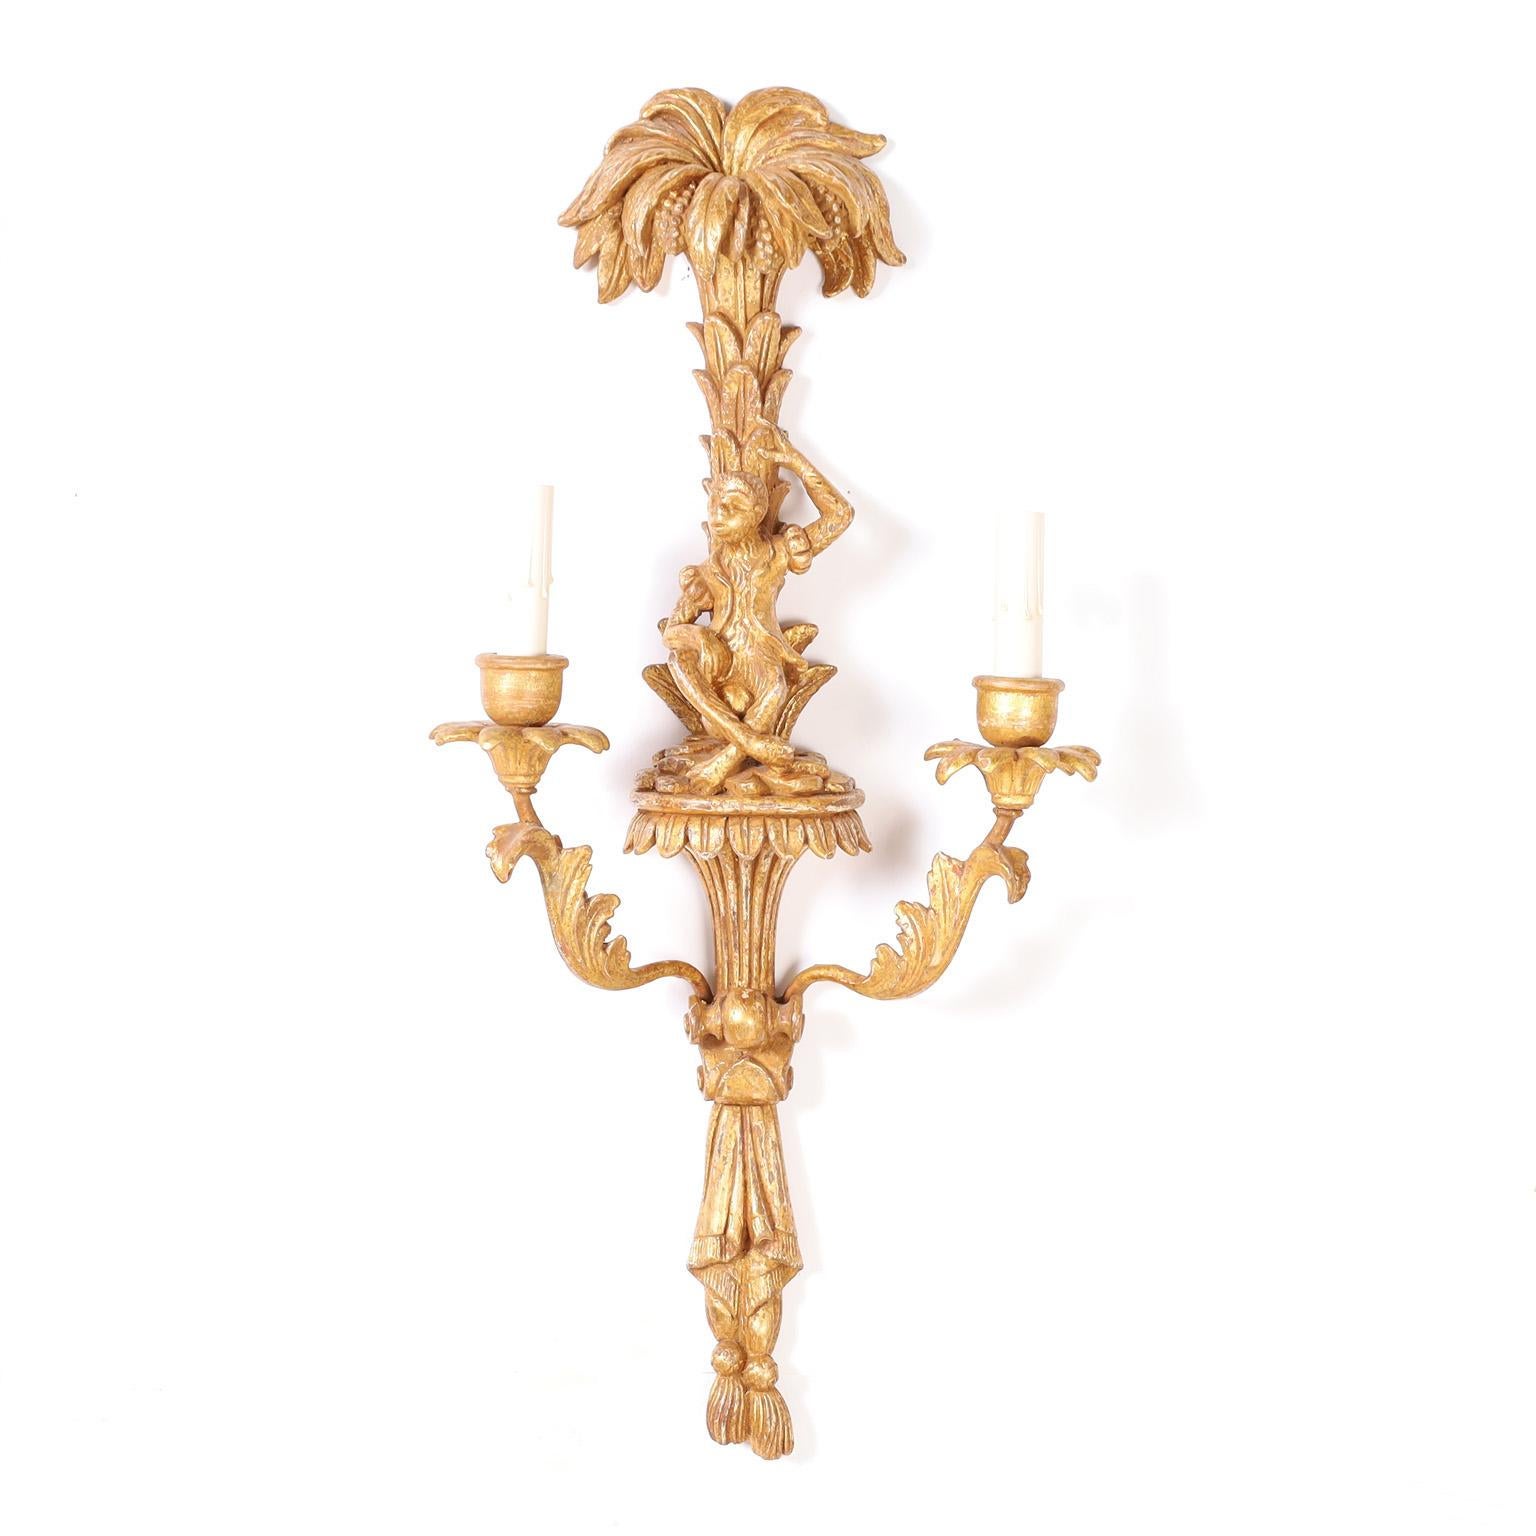 Gilt Pair of Antique Carved Wood Italian Wall Sconces with Monkeys